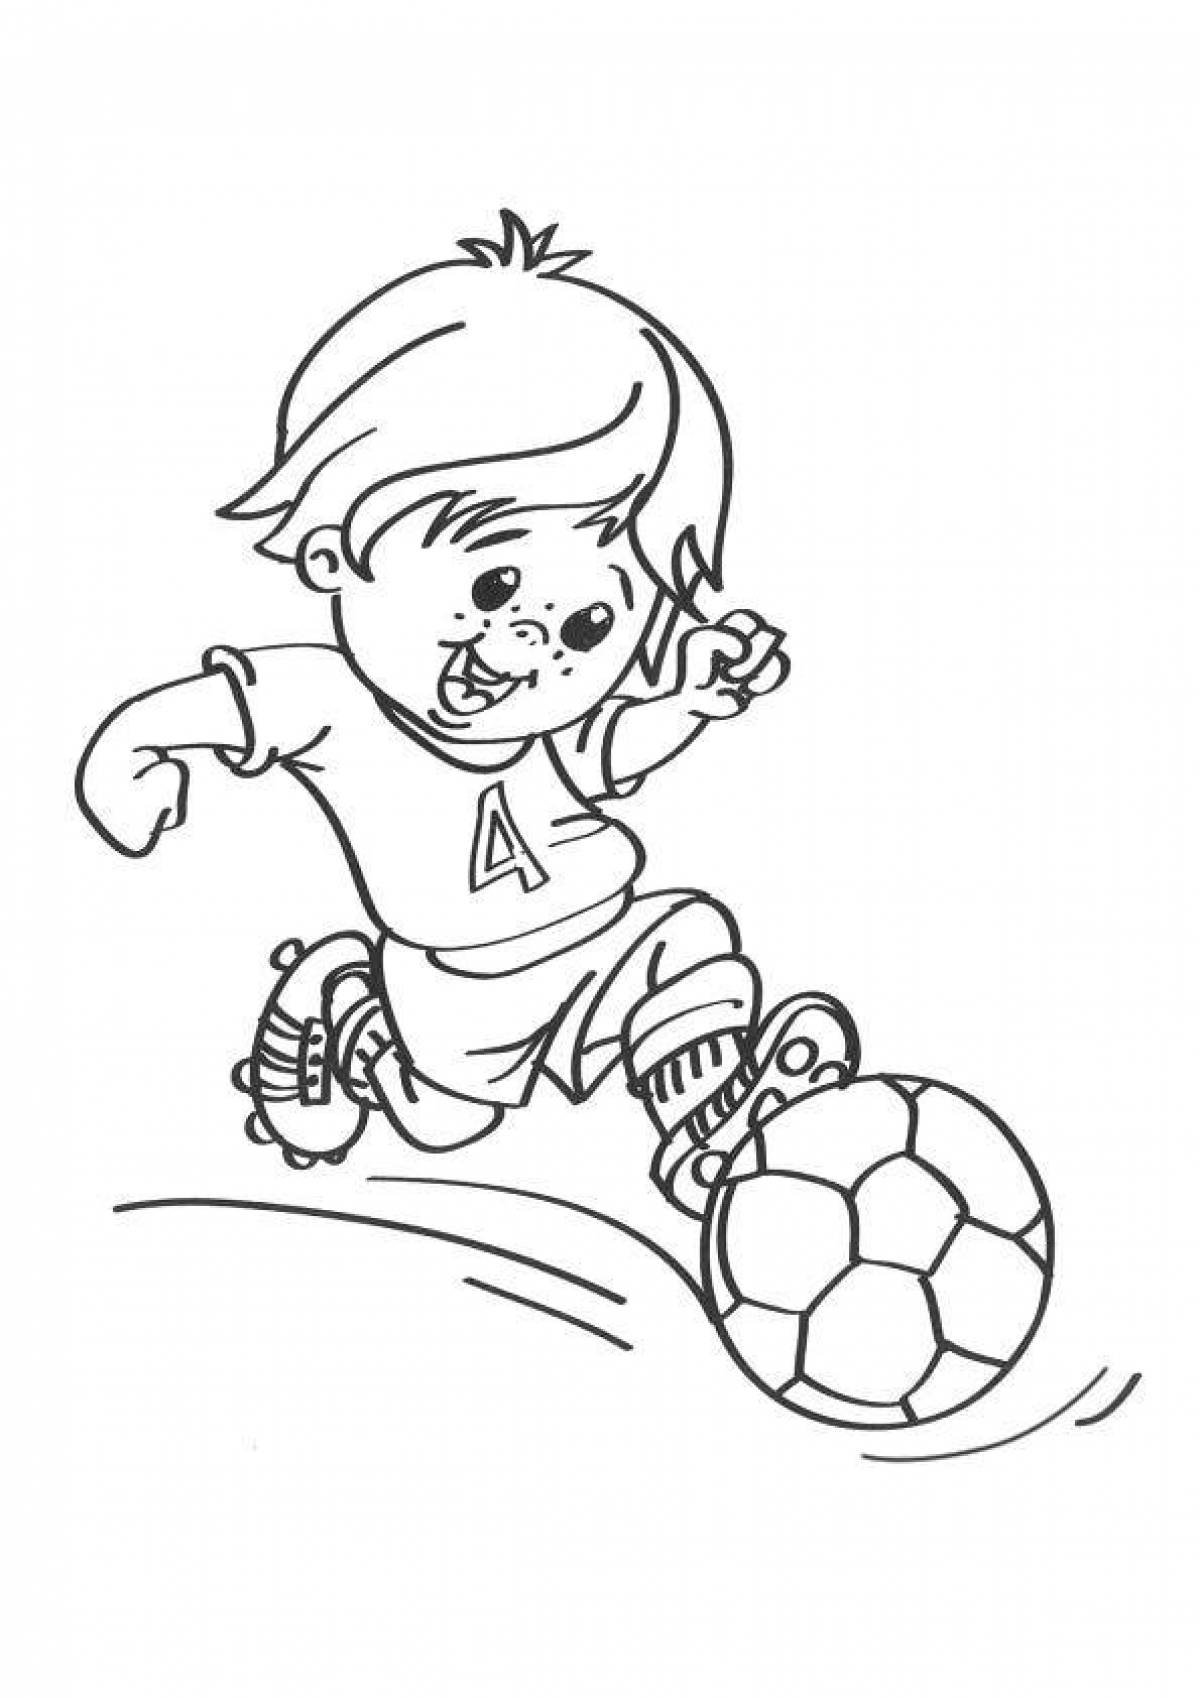 Great football coloring book for kids